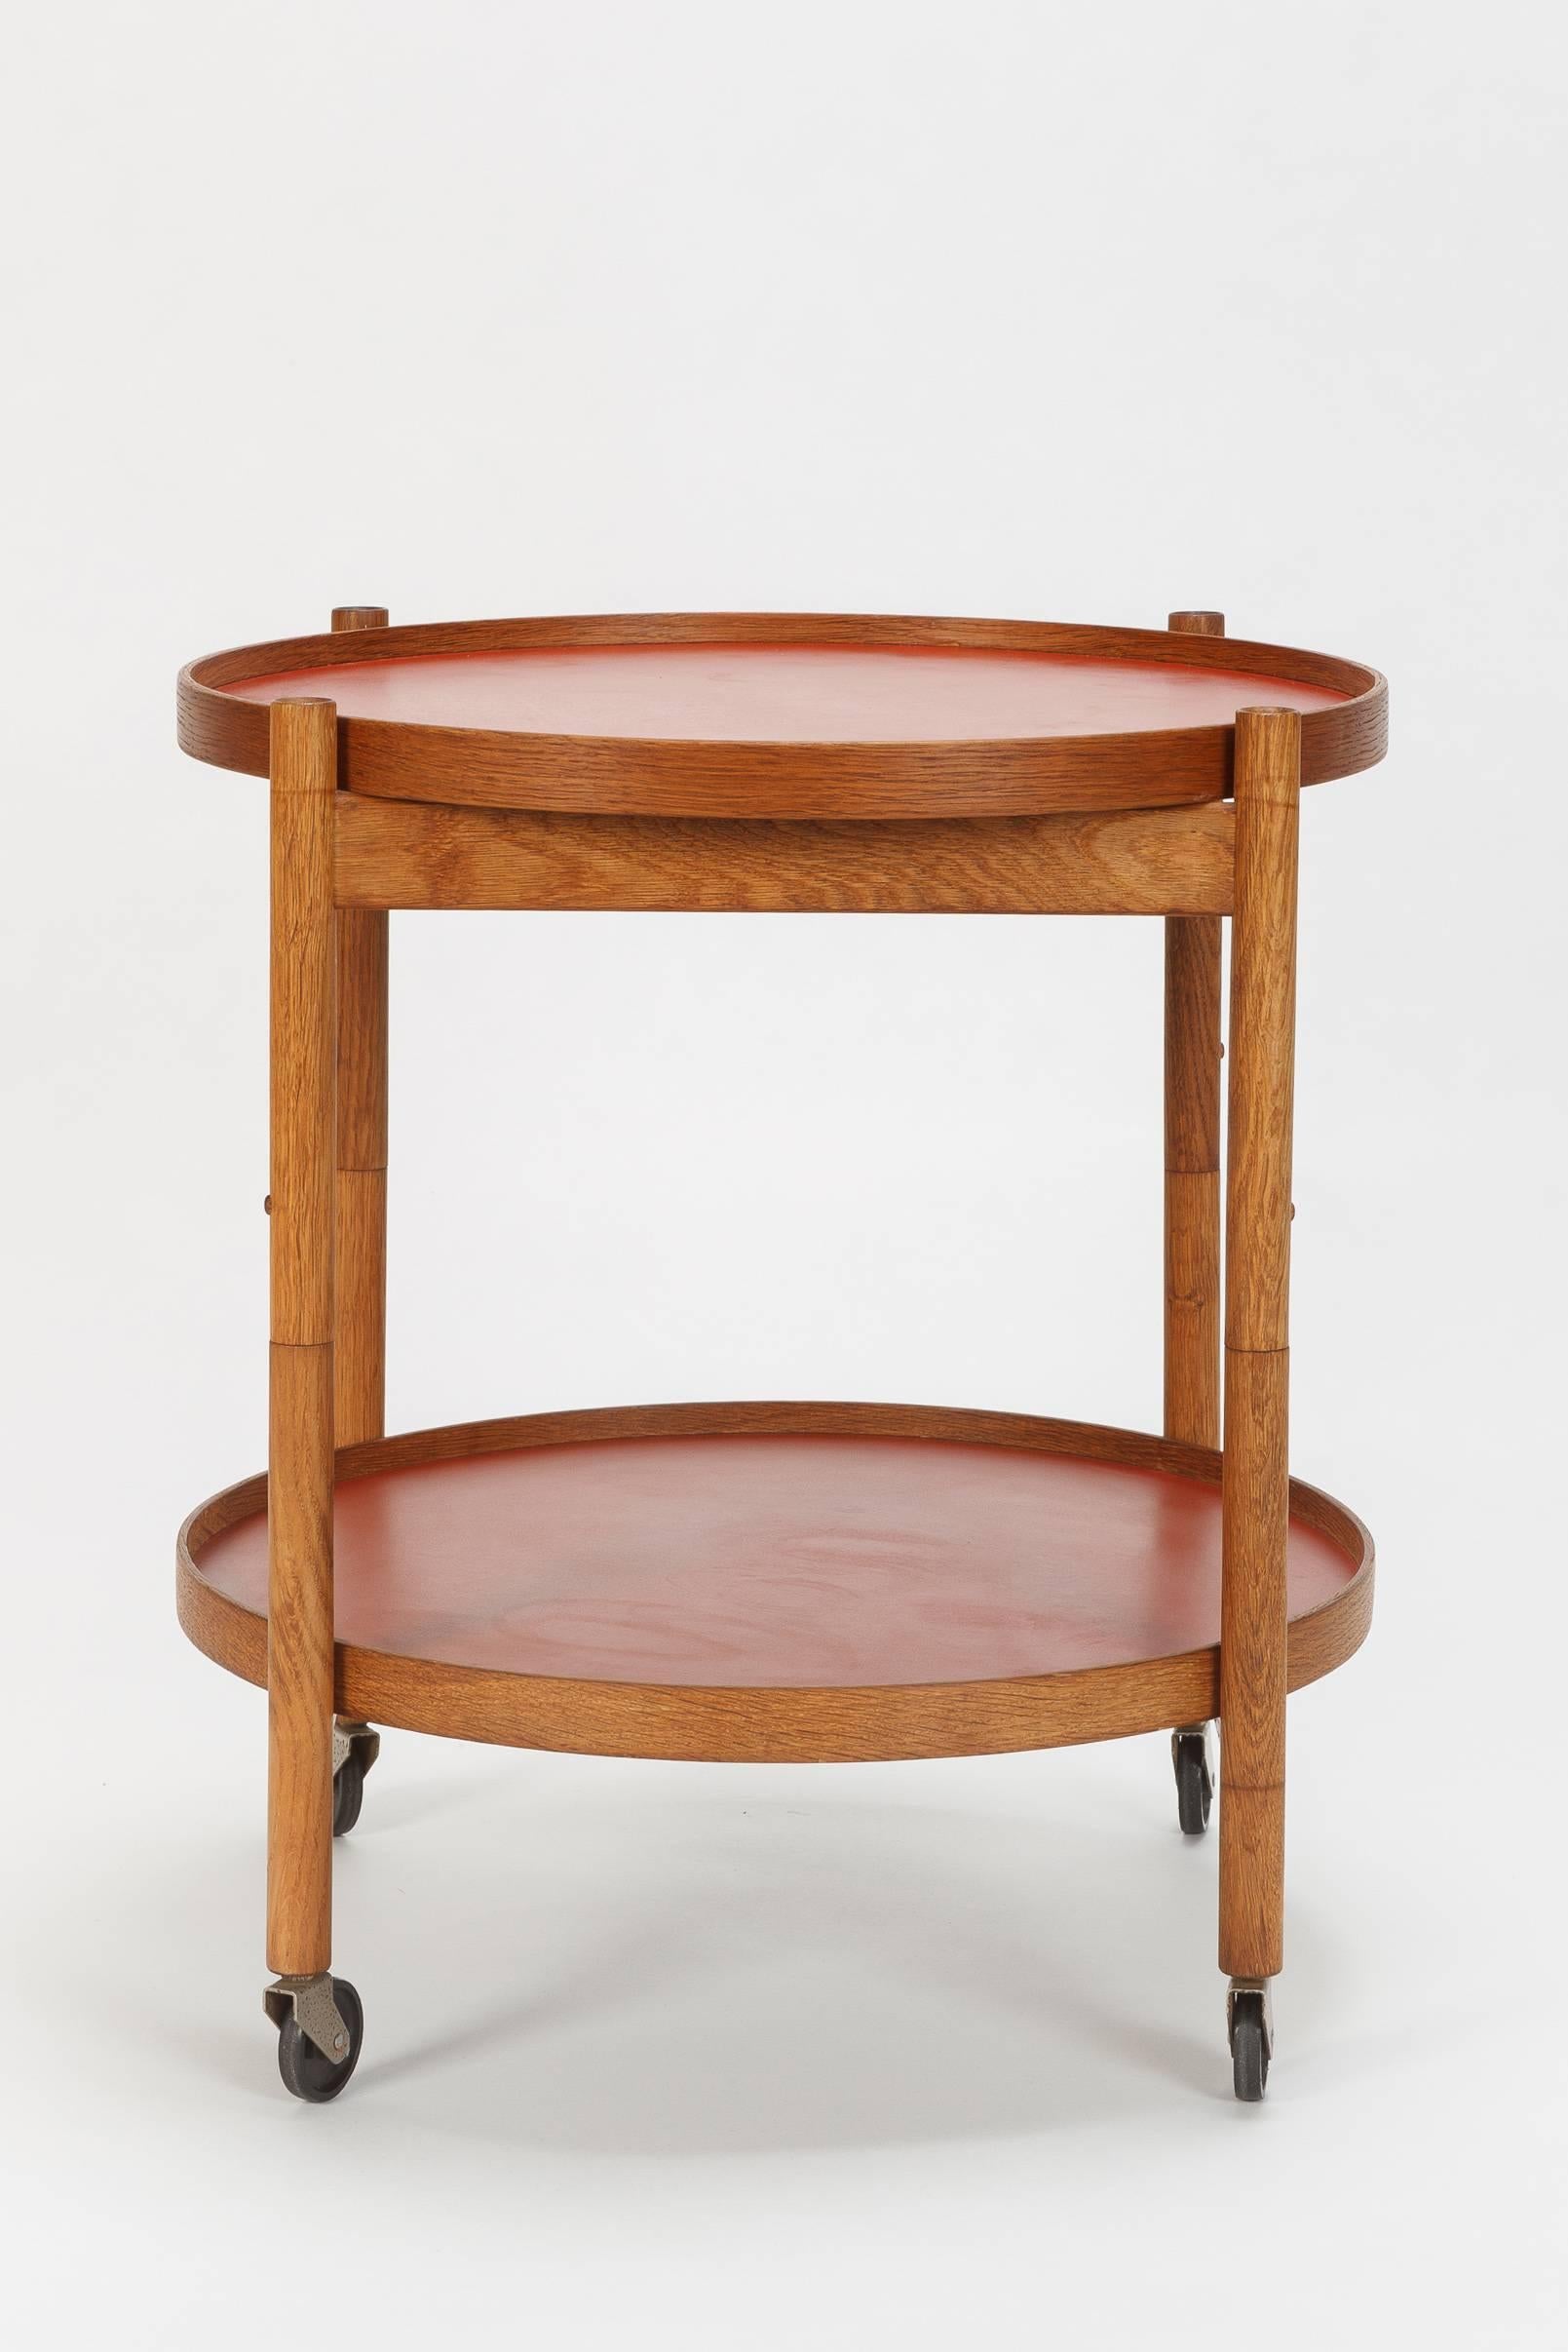 Lovely Hans Bølling bar cart designed in 1963 and manufactured by Torben Ørskov. The frame is made of solid oak, this model features two double sided trays, one has a red lino surface and the other a black. This tray table was designed after a